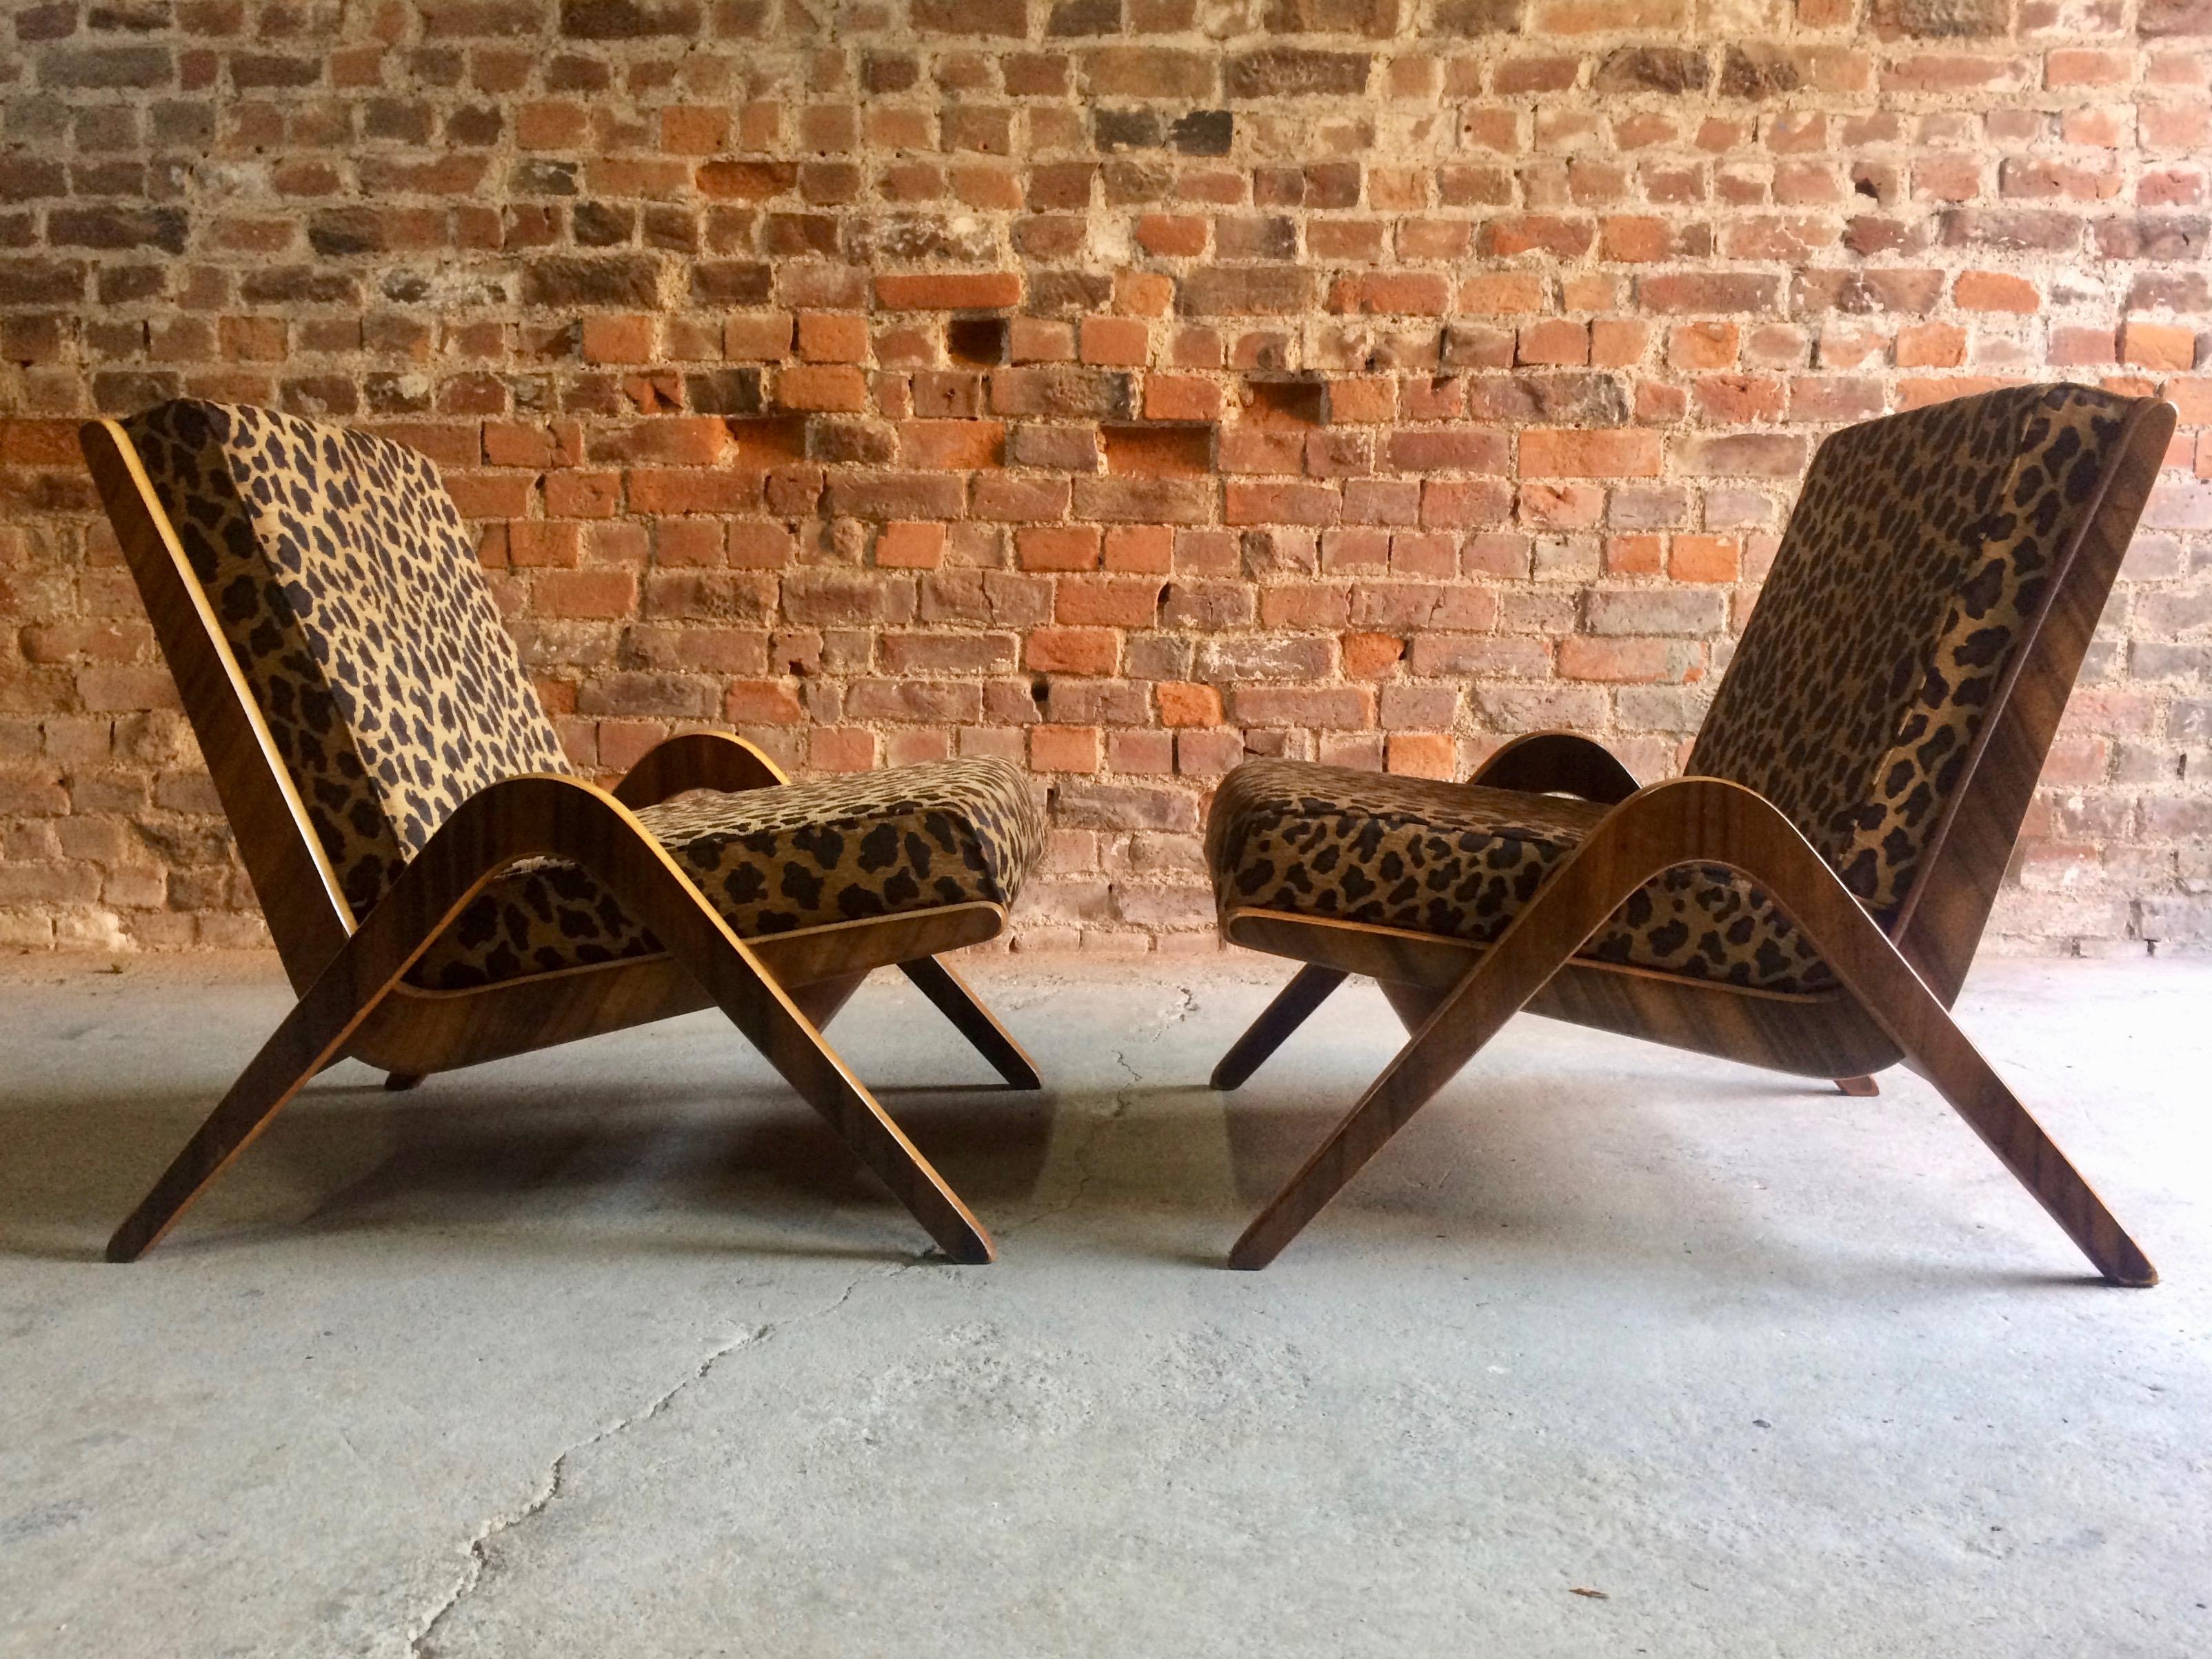 Mid-20th Century Midcentury Boomerang Chairs Pair by Neil Morris for Morris of Glasgow Walnut